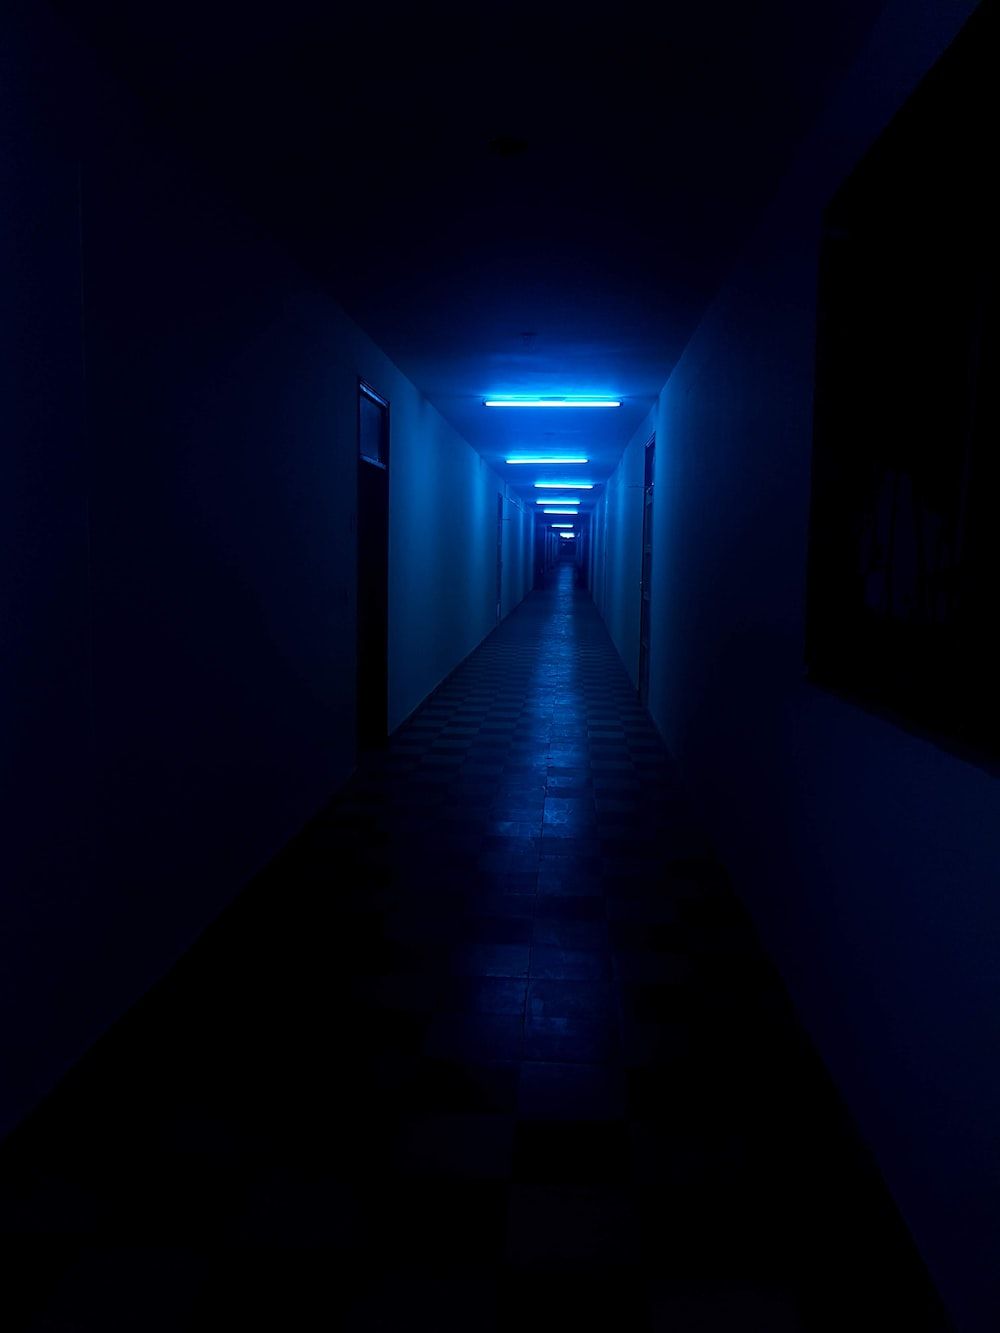 A hallway with blue lighting and black tiles - Neon blue, dark blue